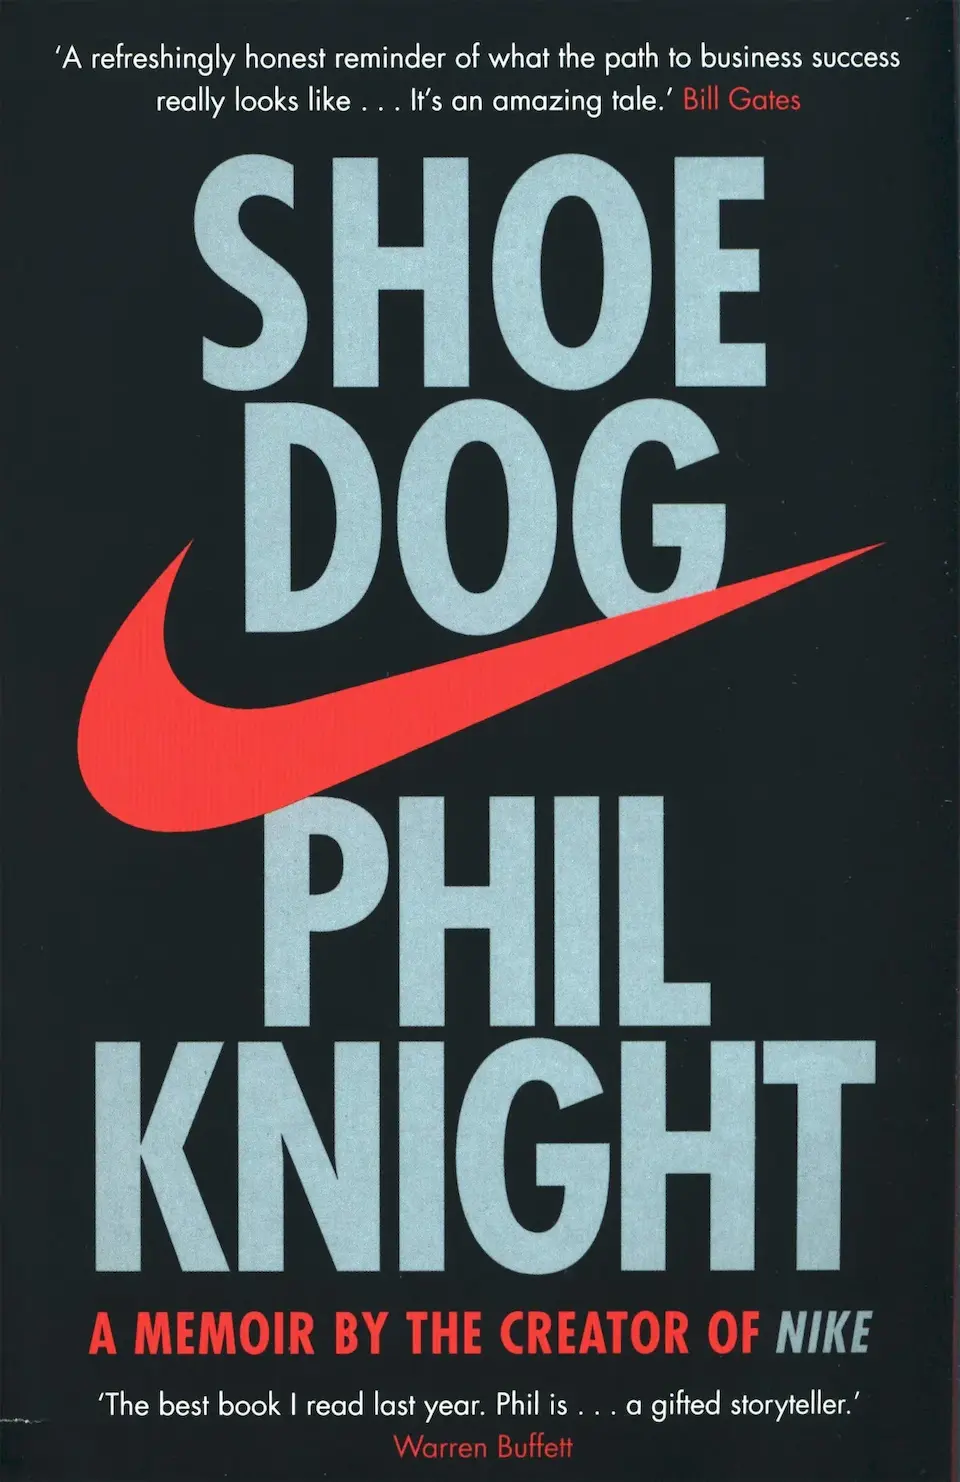 Shoe Dog by Phil Knight finished on 2021 Nov 28